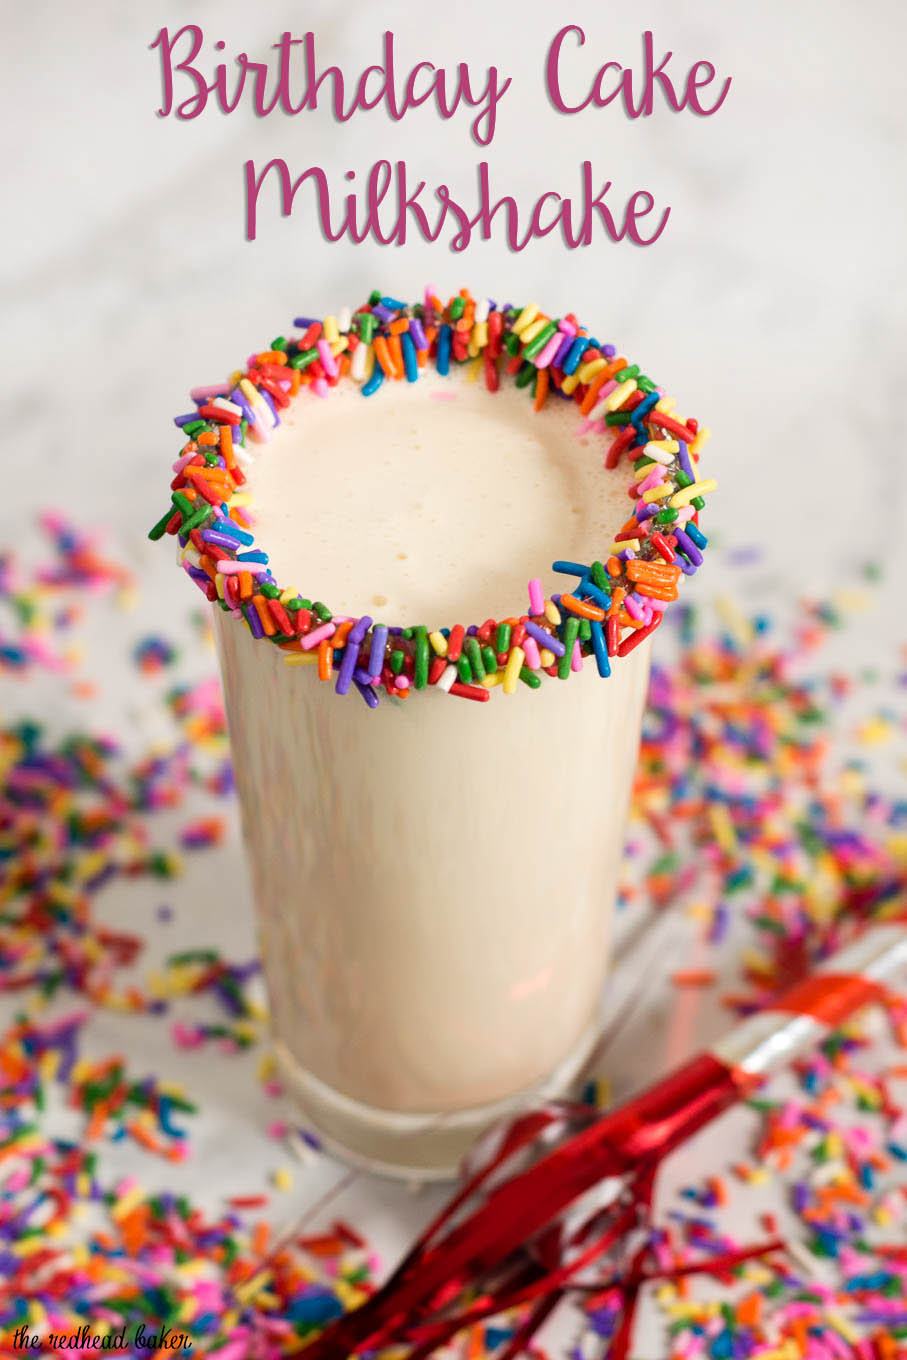 Prefer to drink your cake instead of eat it? Blend up a birthday cake milkshake! Adults can add a shot of vodka for a little extra celebration.